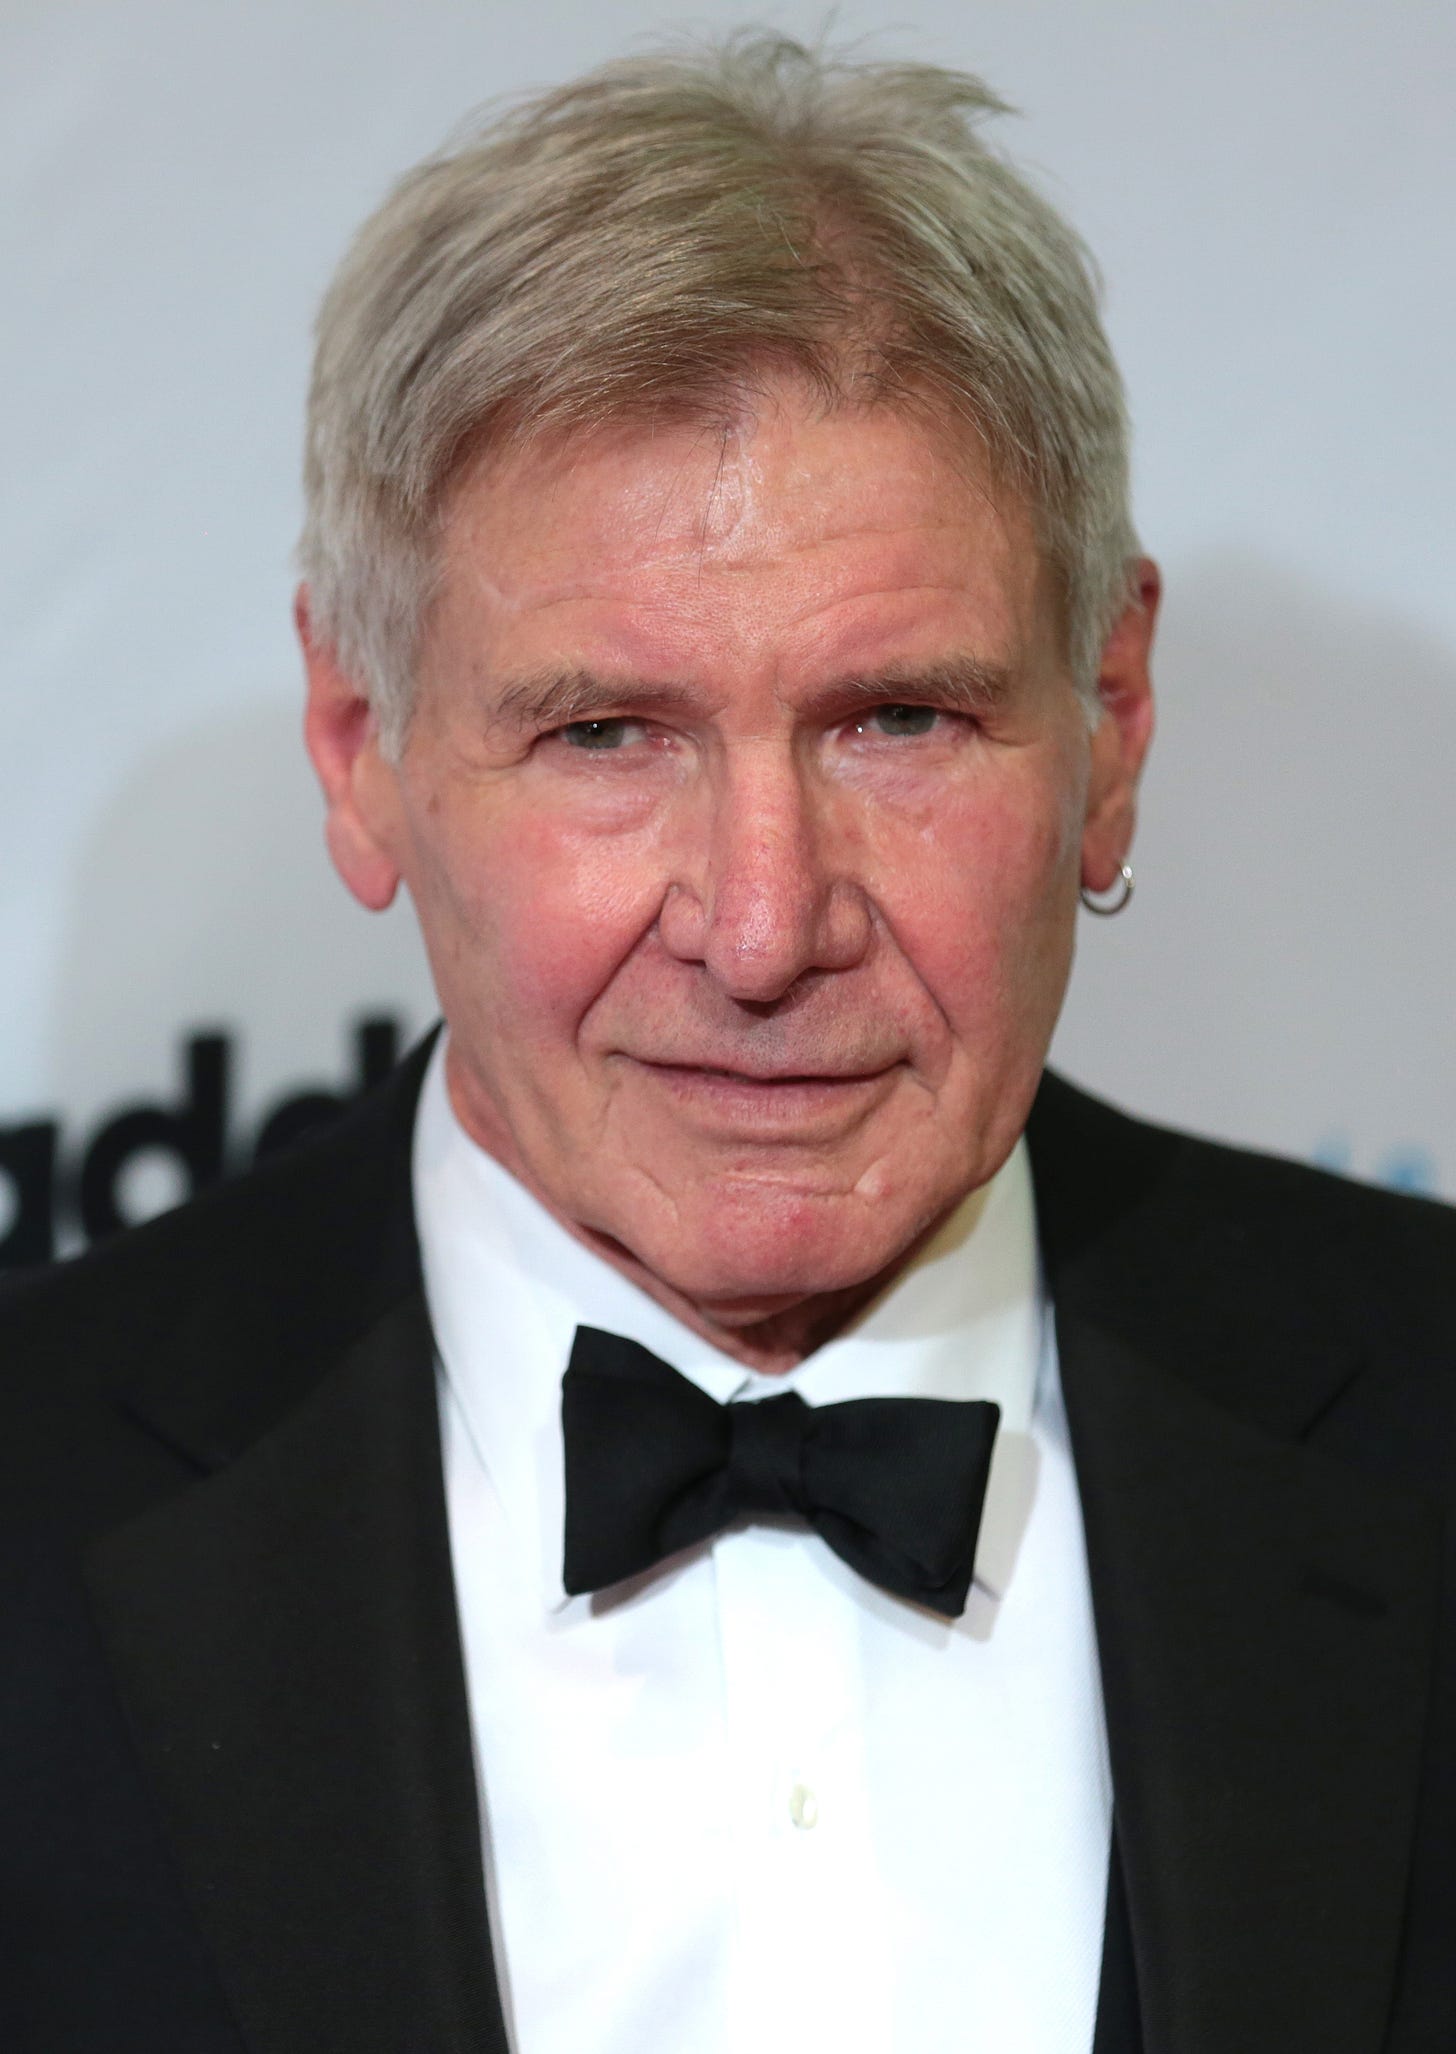 Harrison Ford, in a tux.